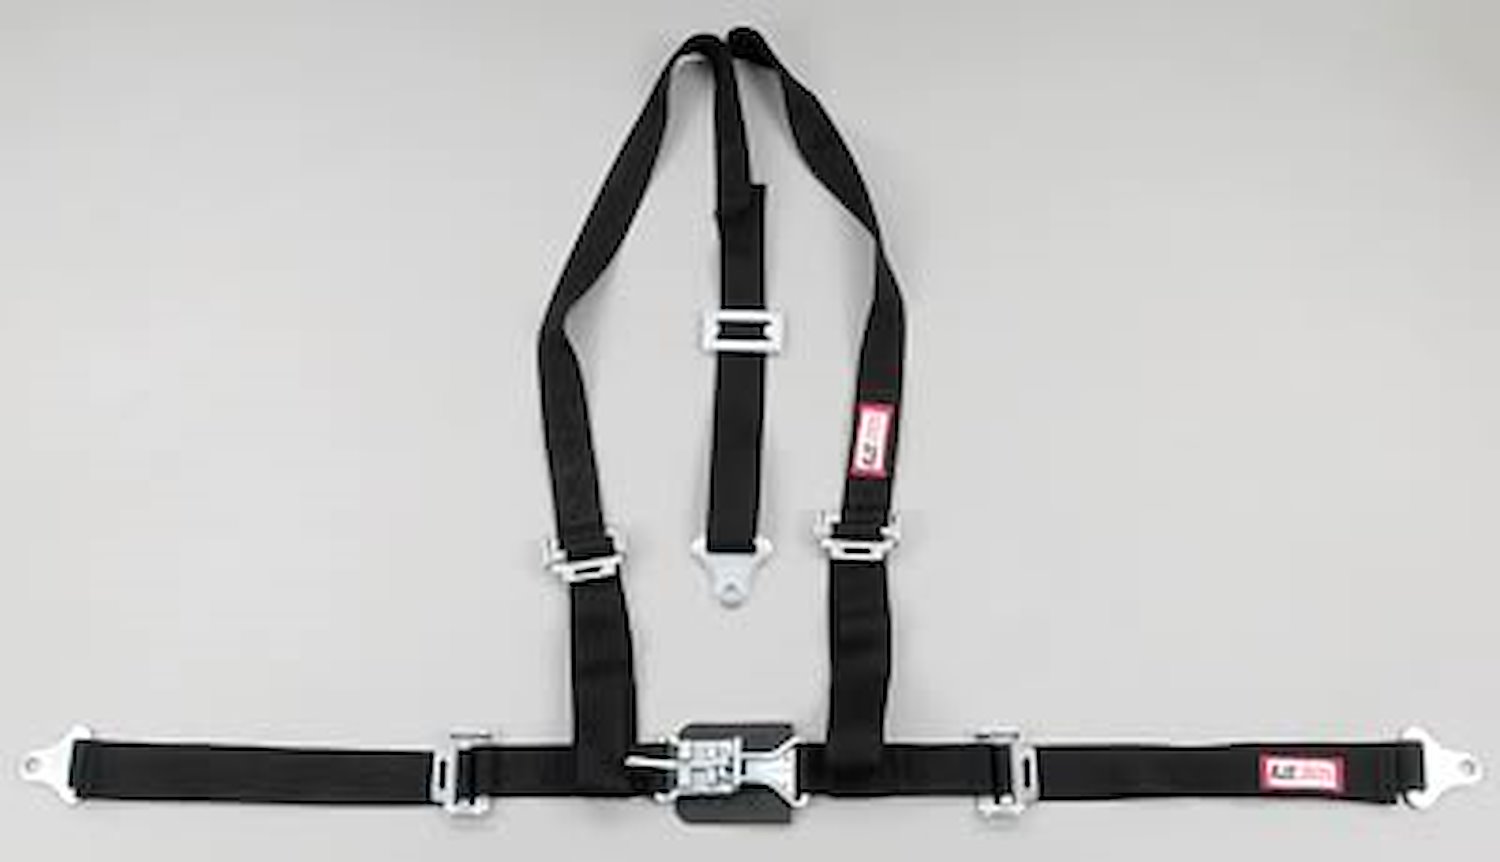 NON-SFI L&L HARNESS 3 PULL UP Lap Belt SEWN IN 2 Shoulder Harness V ROLL BAR Mount w/STERNUM STRAP ALL SNAP ENDS HOT PINK